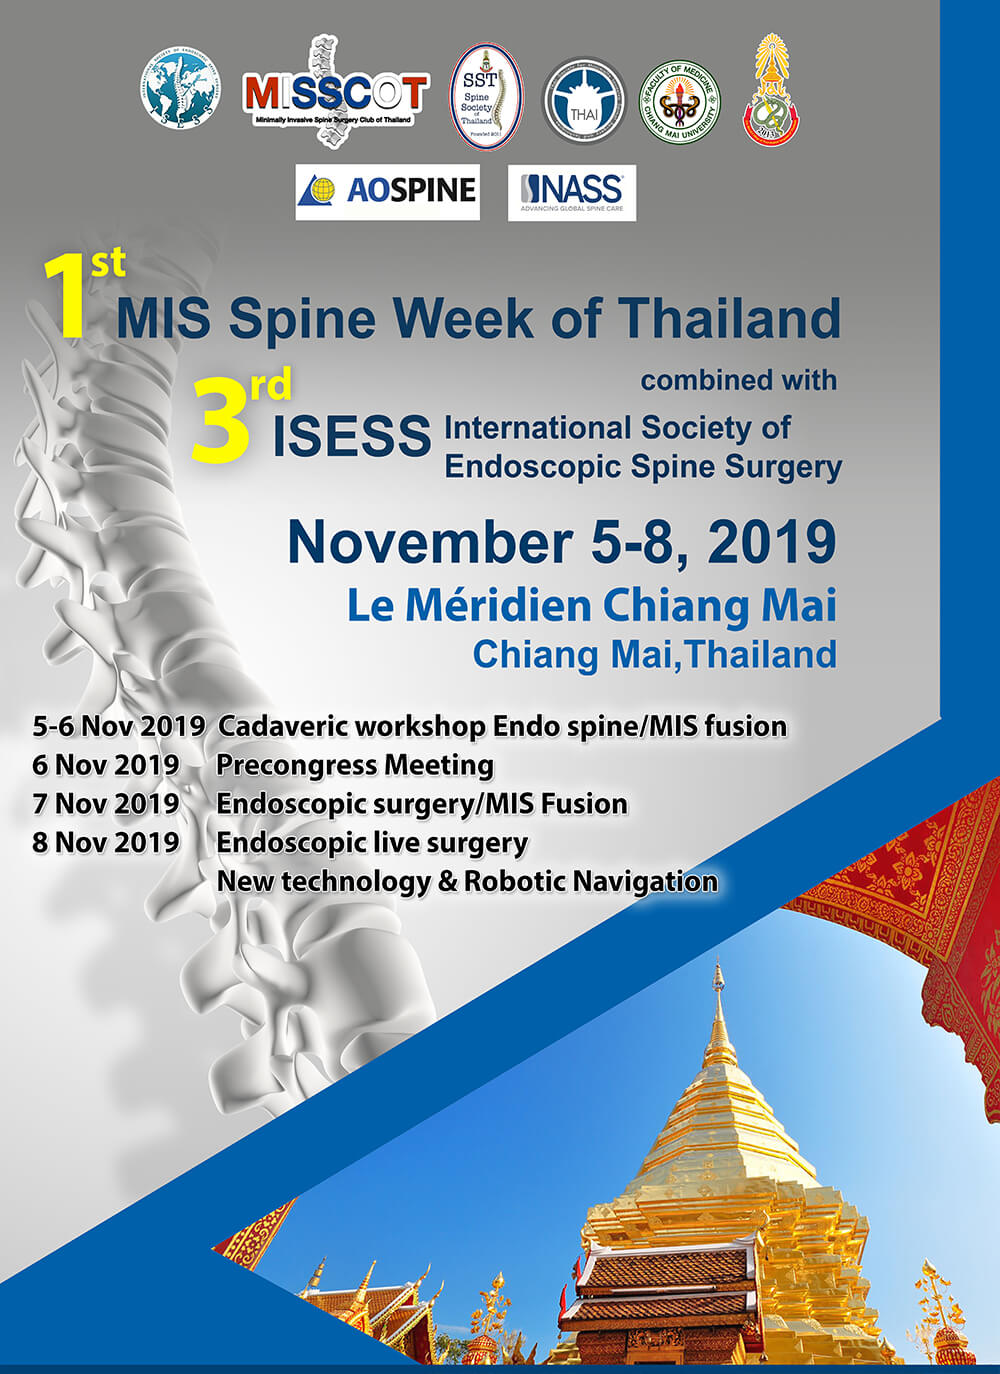 The 1st Minimally Invasive Spine Week of Thailand meeting combined with the 3rd International Society of Endoscopic Spine Surgery (ISESS) meeting